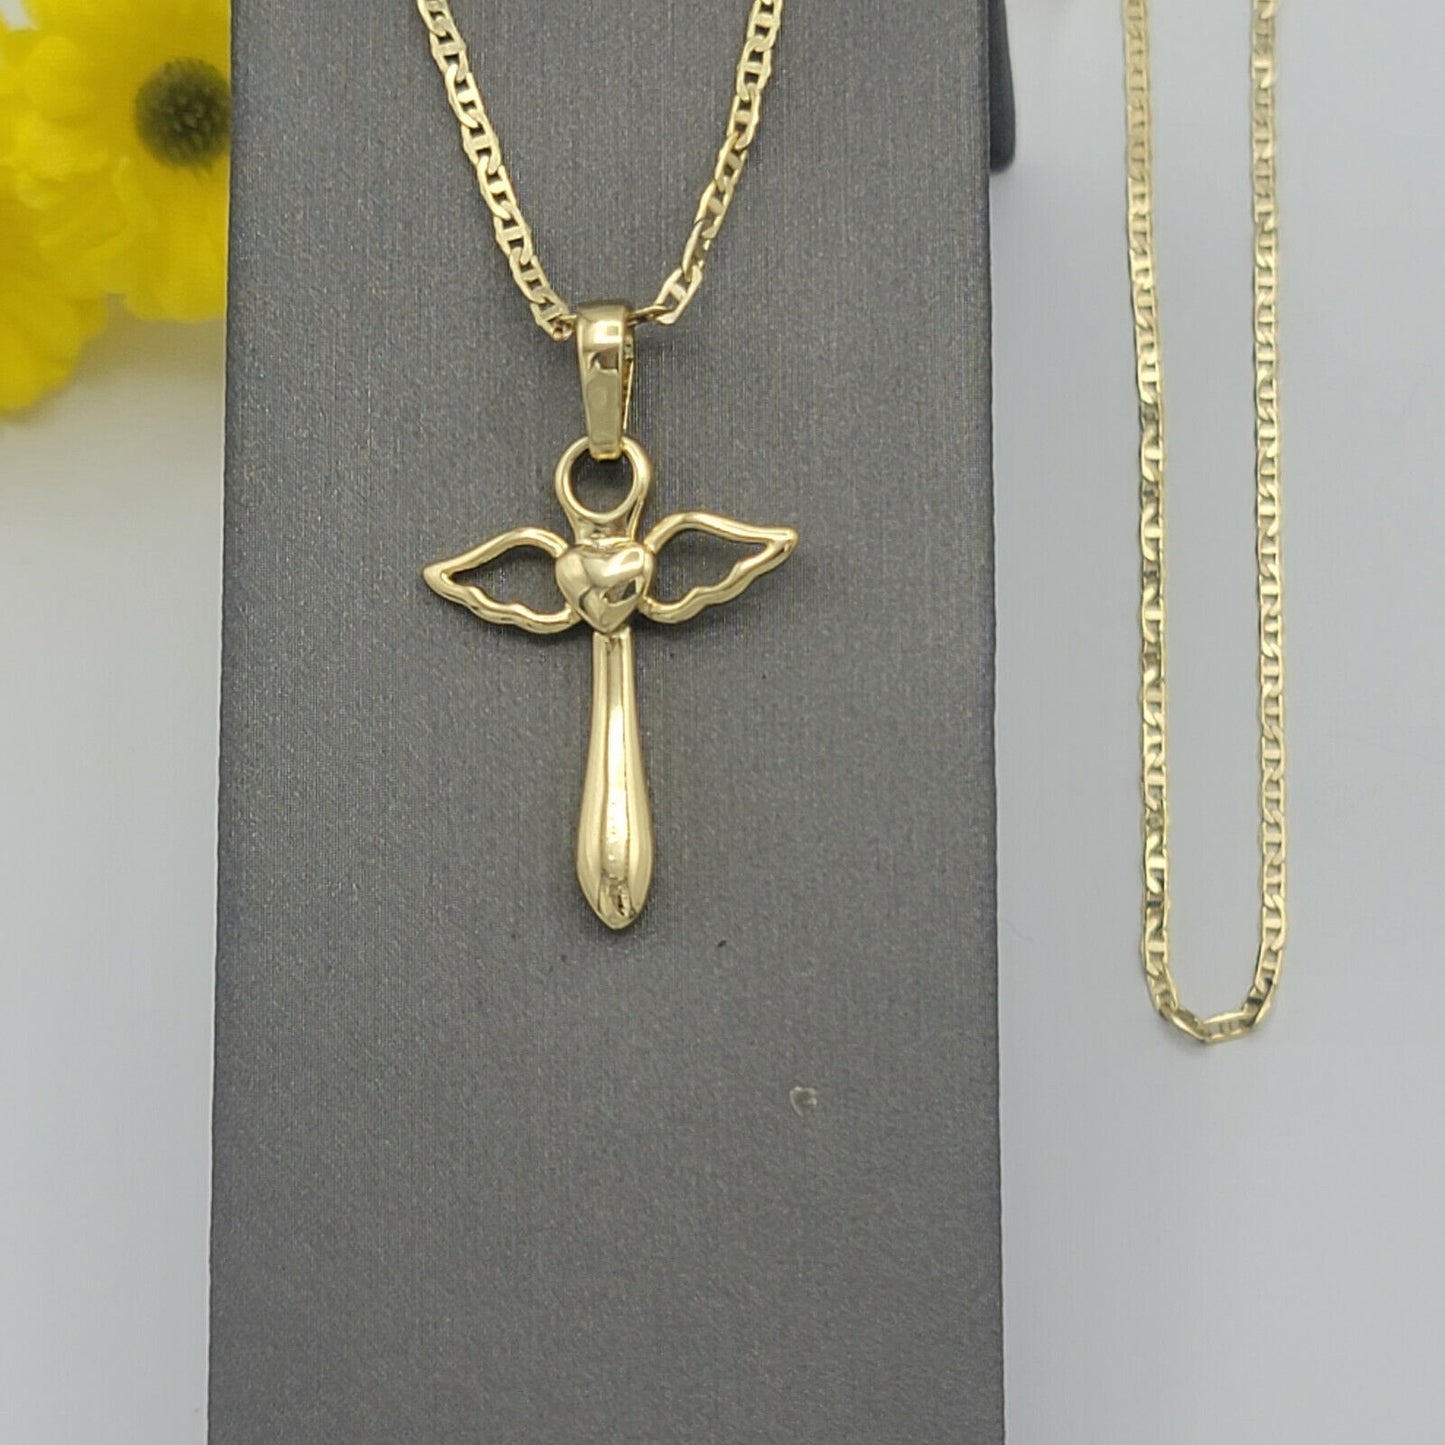 Necklaces - 14K Gold Plated. Cross with Wings Heart Angel Pendant & Chain.